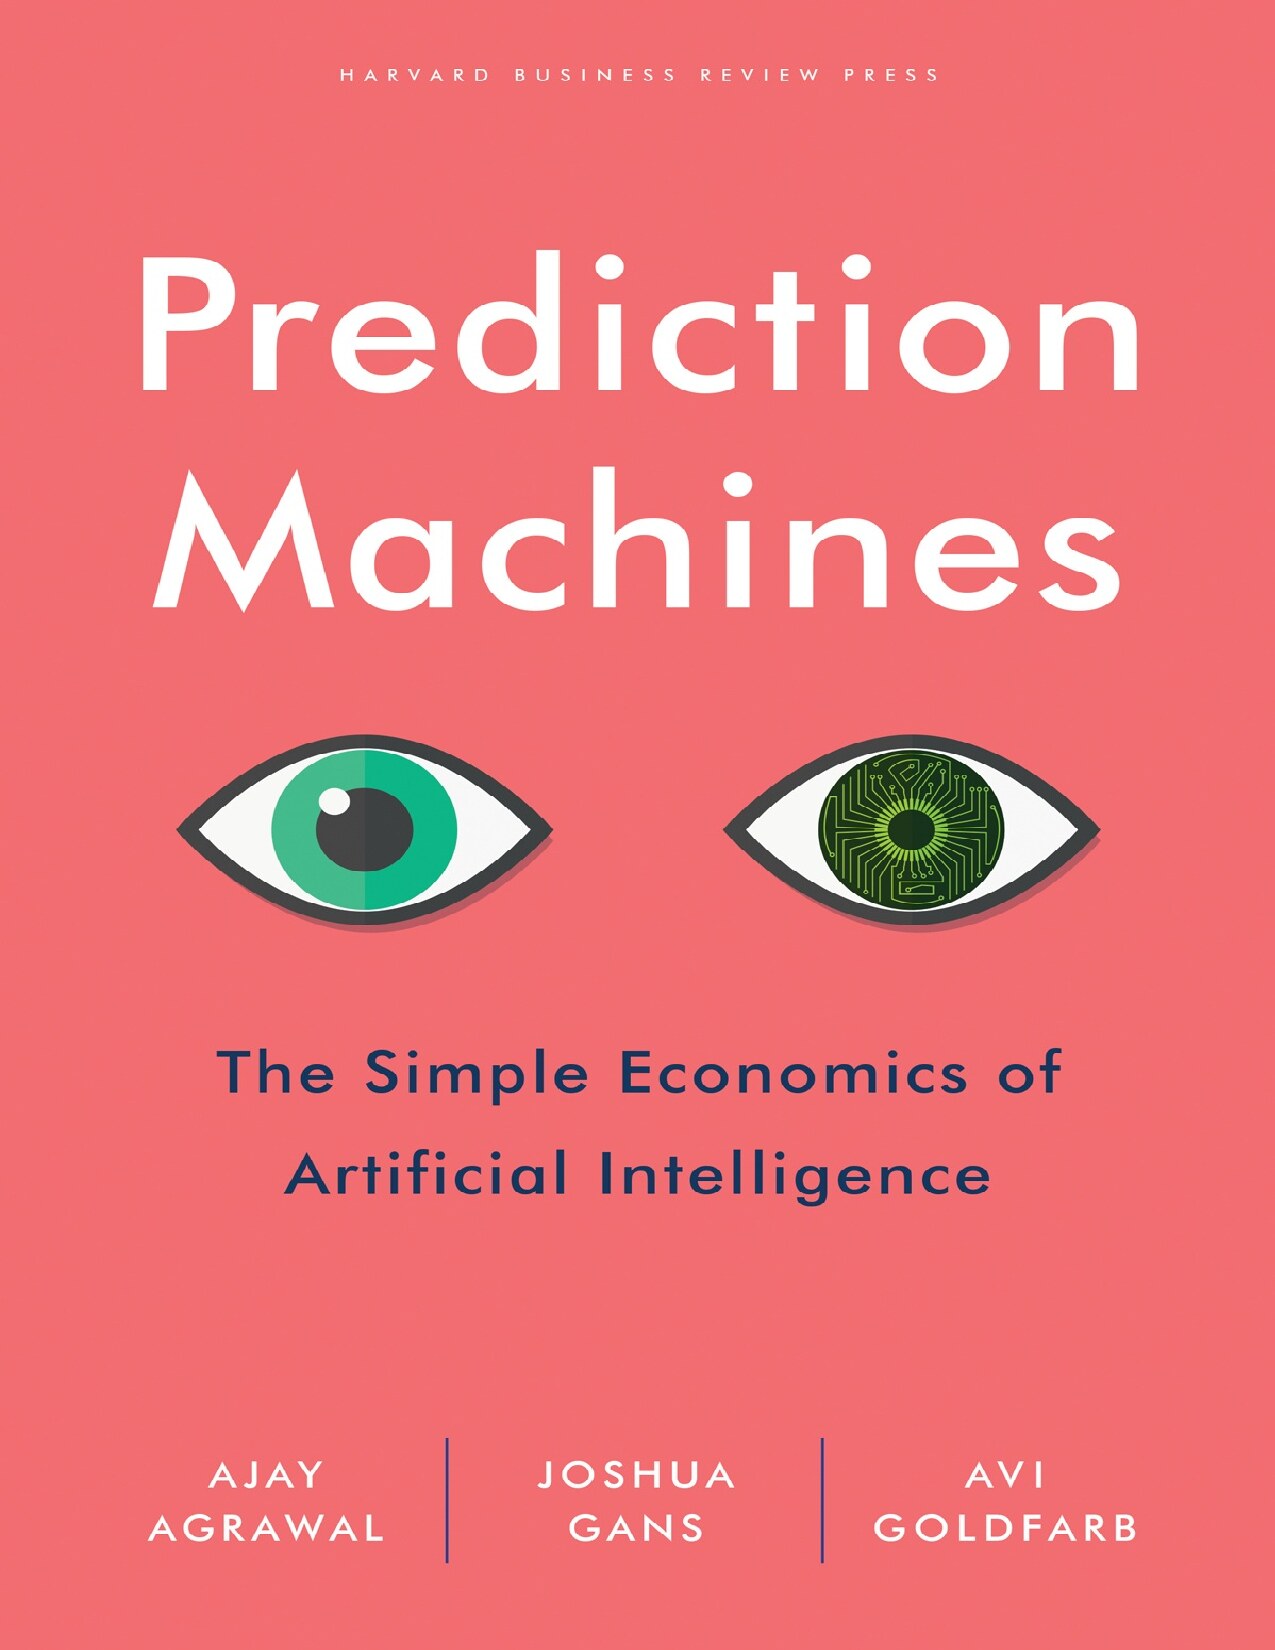 Prediction Machines: The Simple Economics of Artificial Intelligence - PDFDrive.com